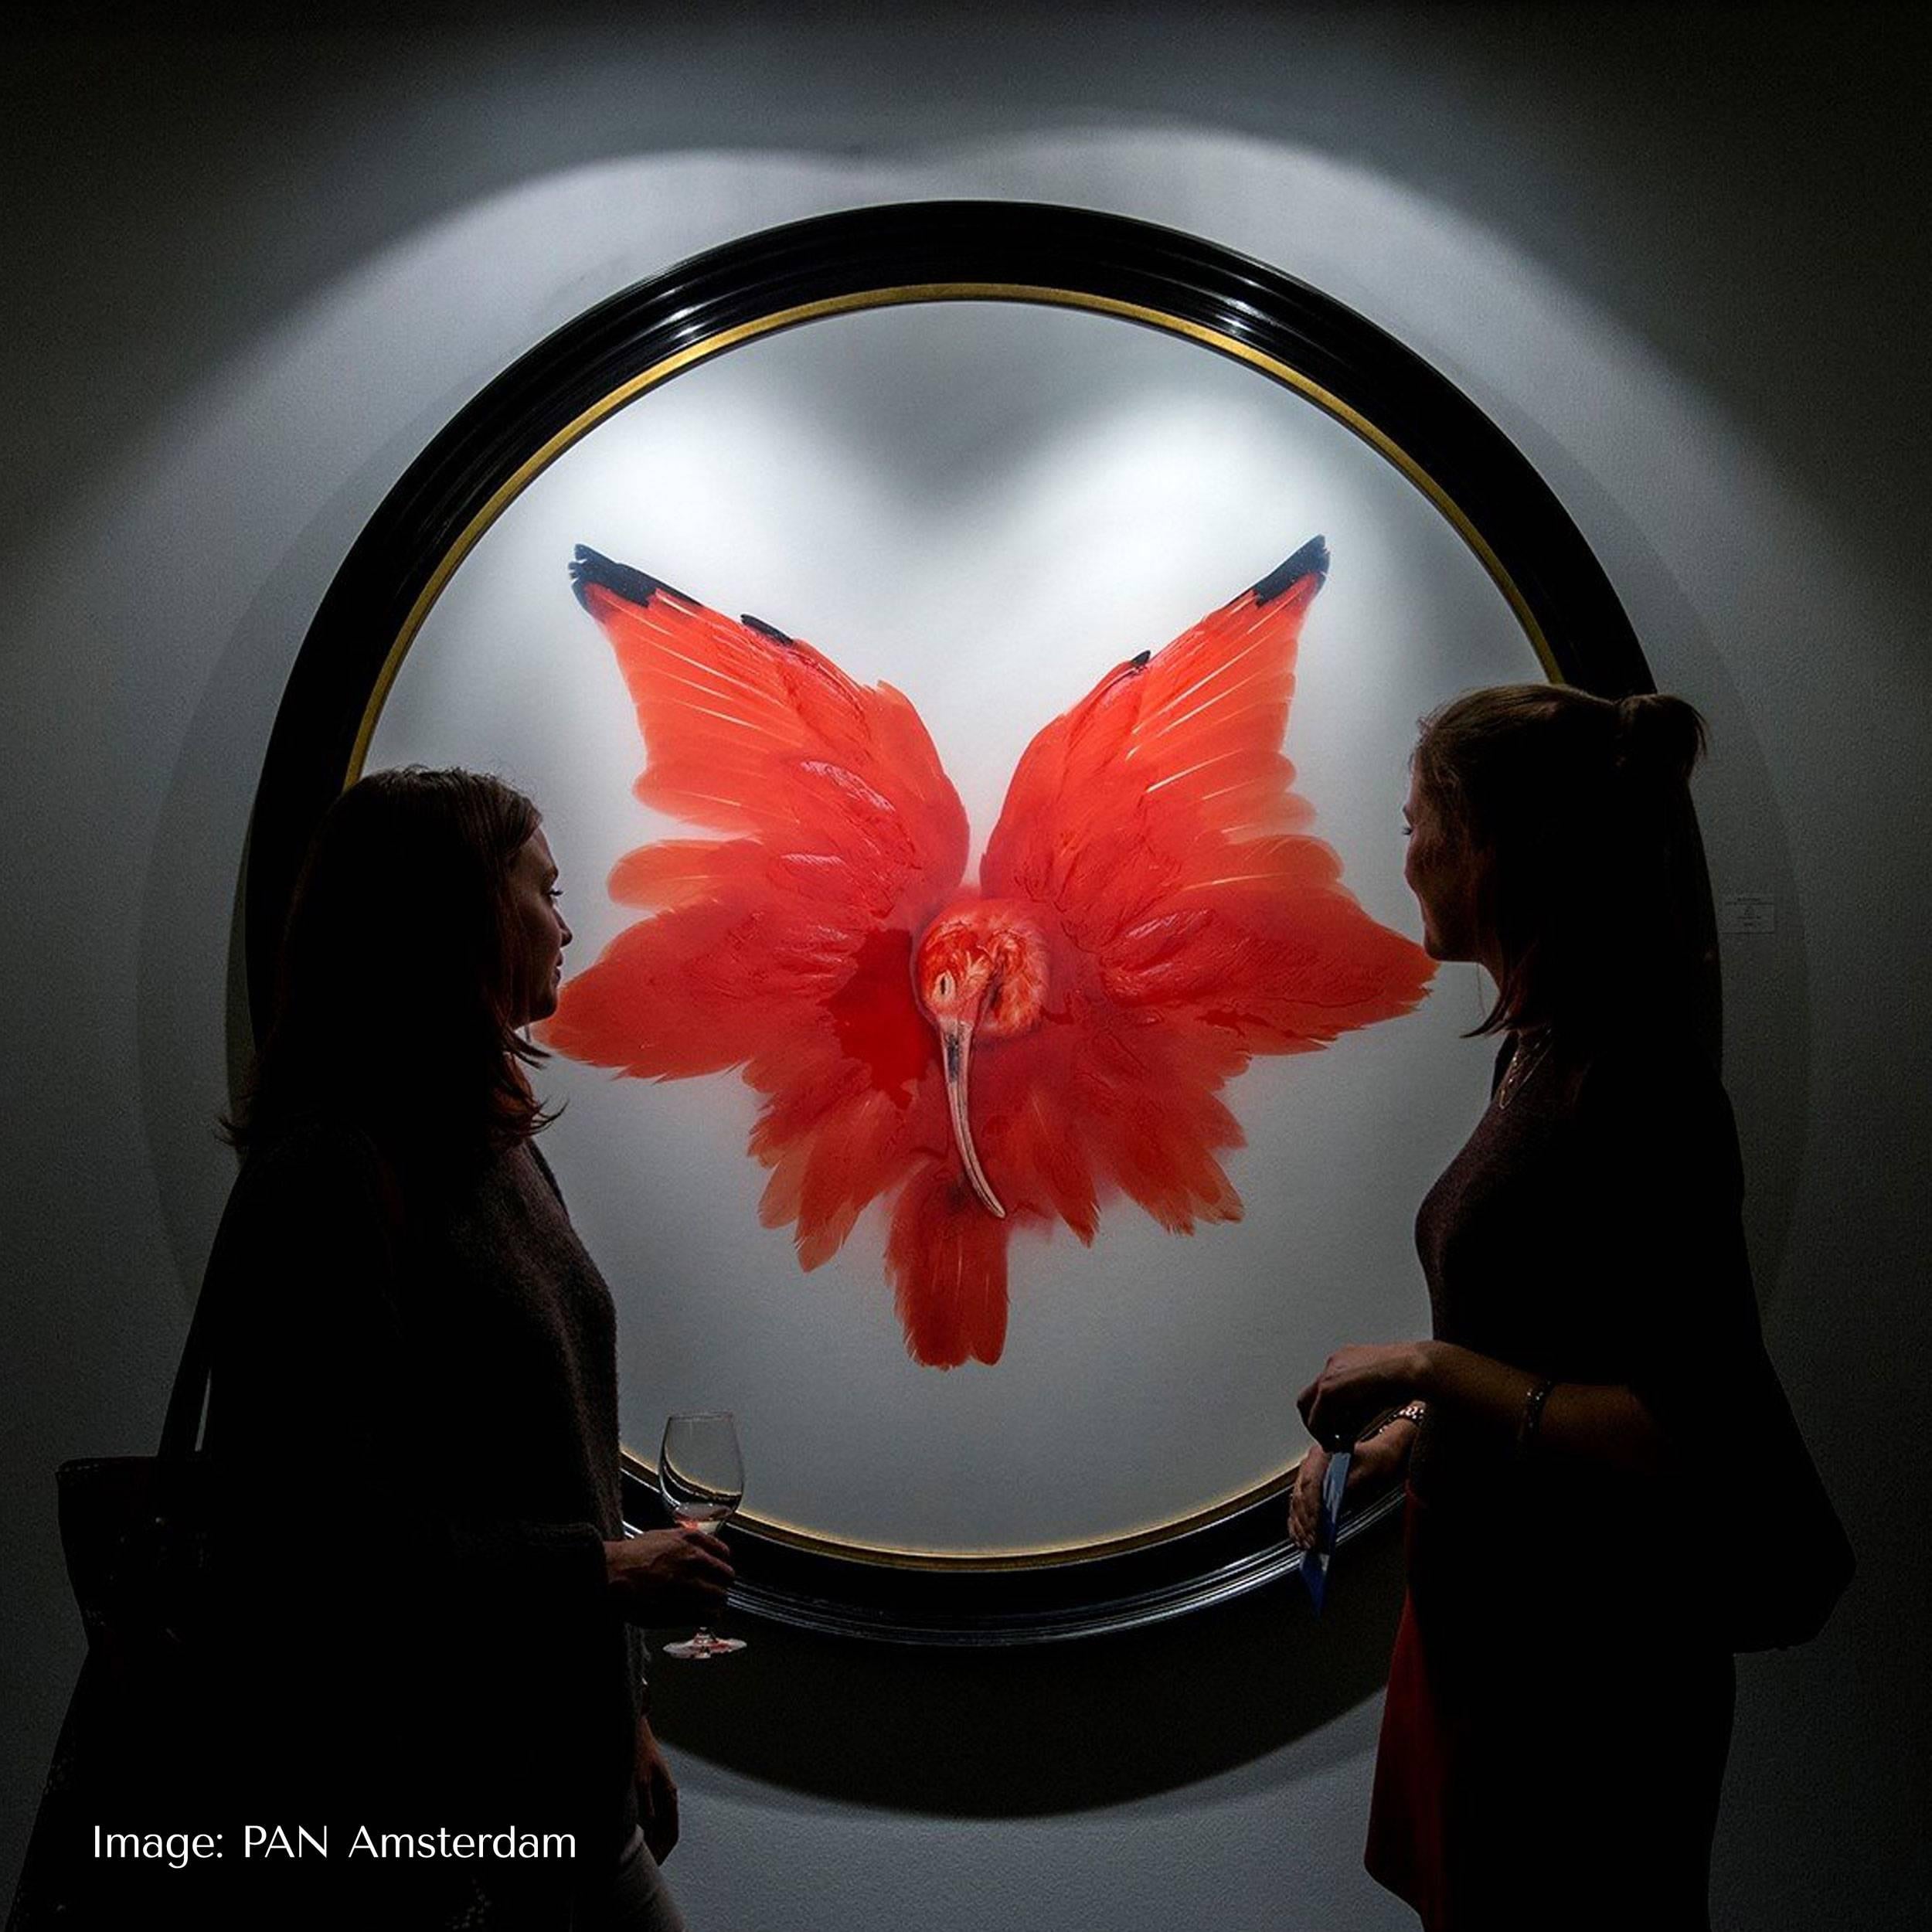 Title:
Unknown Pose by Scarlet Ibis II. Edition of 3.
Special Edition limited to 3 prints. Framed in a 17th century 'van Gooyen' profile black wooden circular frame with Museum Glass.

Size:
160 x 160 cm (63 x 63 in).
Size Framed.
174 x 174 cm (68.5